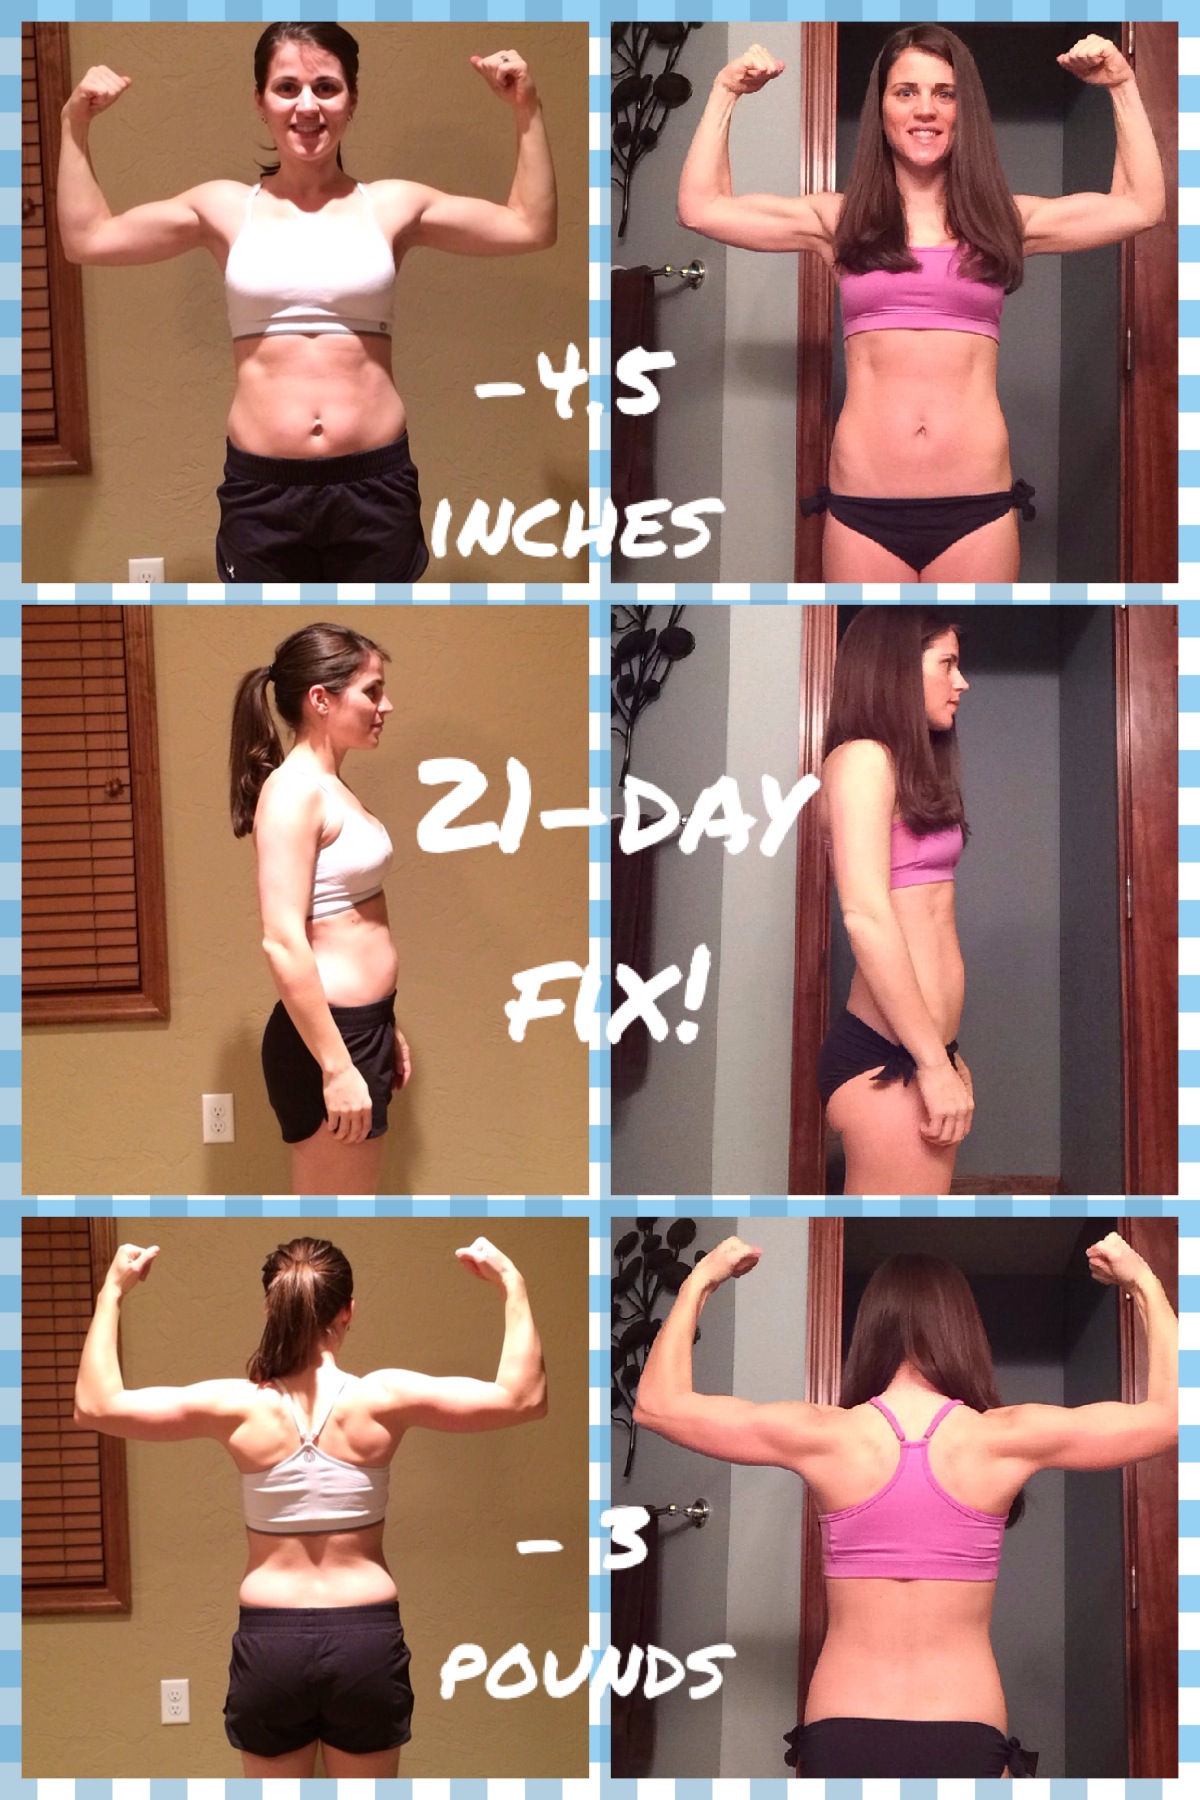 21 day fix without meal plan results